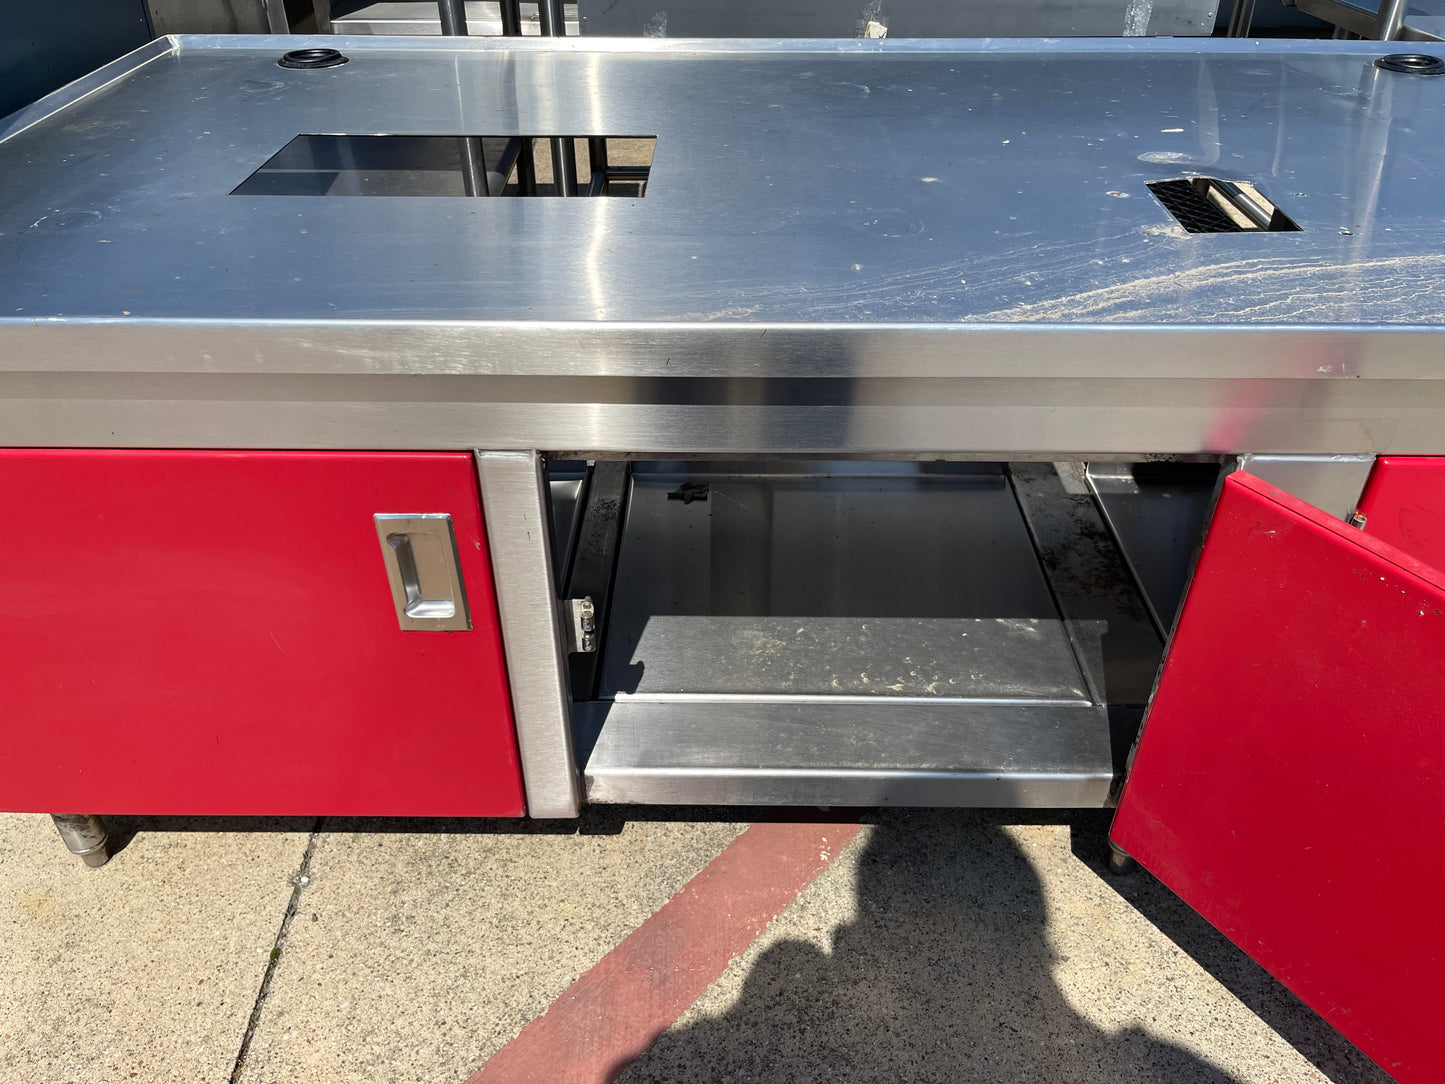 96" Work Top Equipment Stand Cabinet Base with 4 Doors